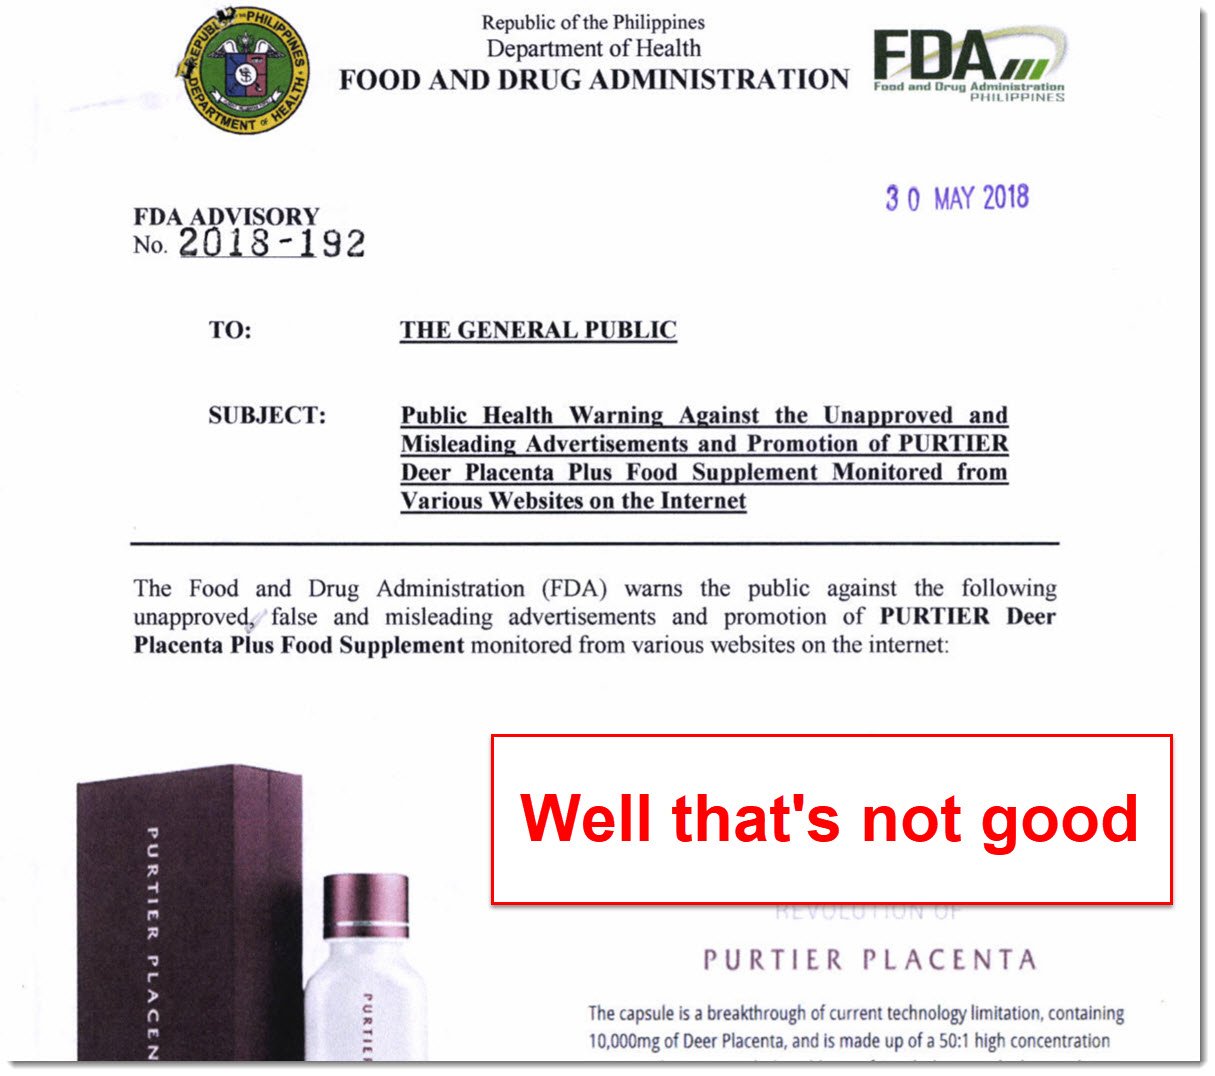 Purtier Placenta Banned in Philippines